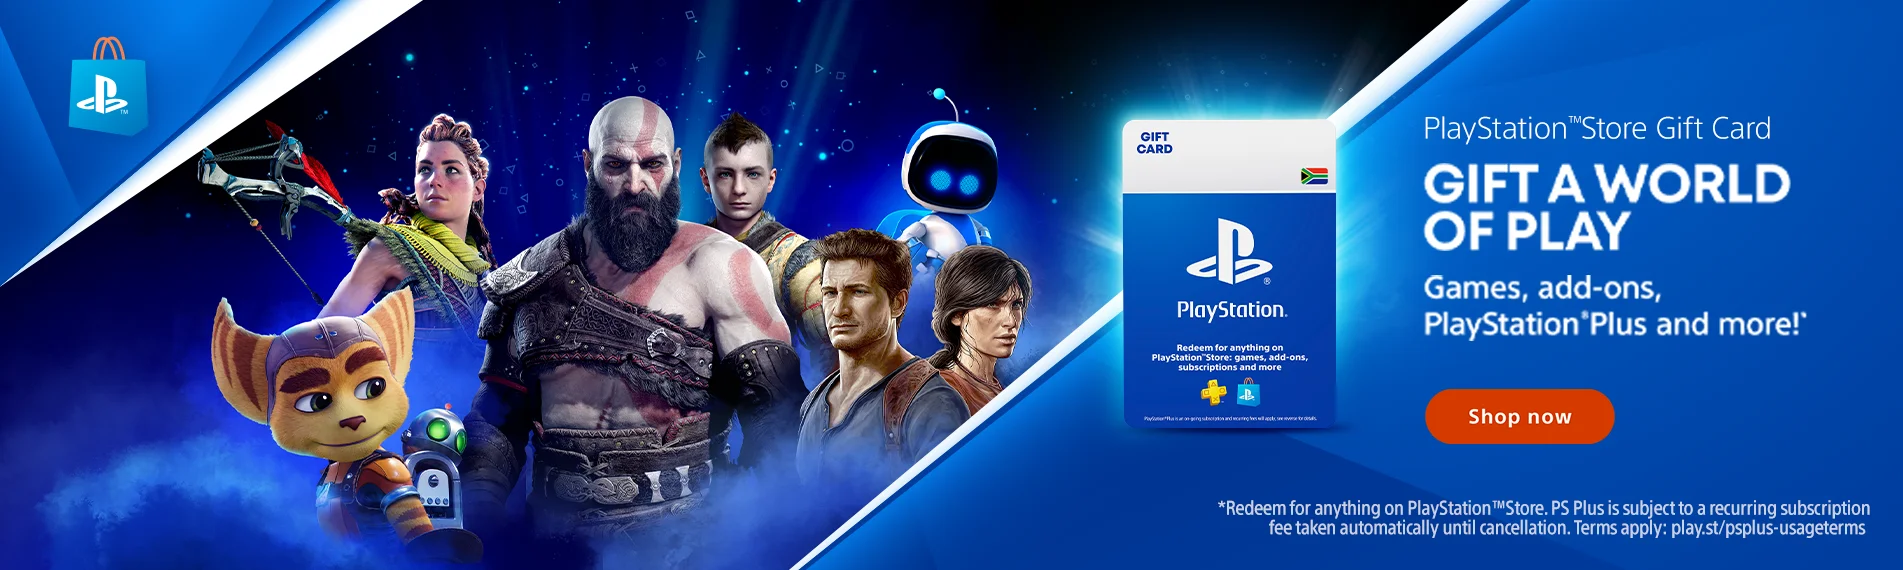 PlayStation Store Gift Card Festive Gifting